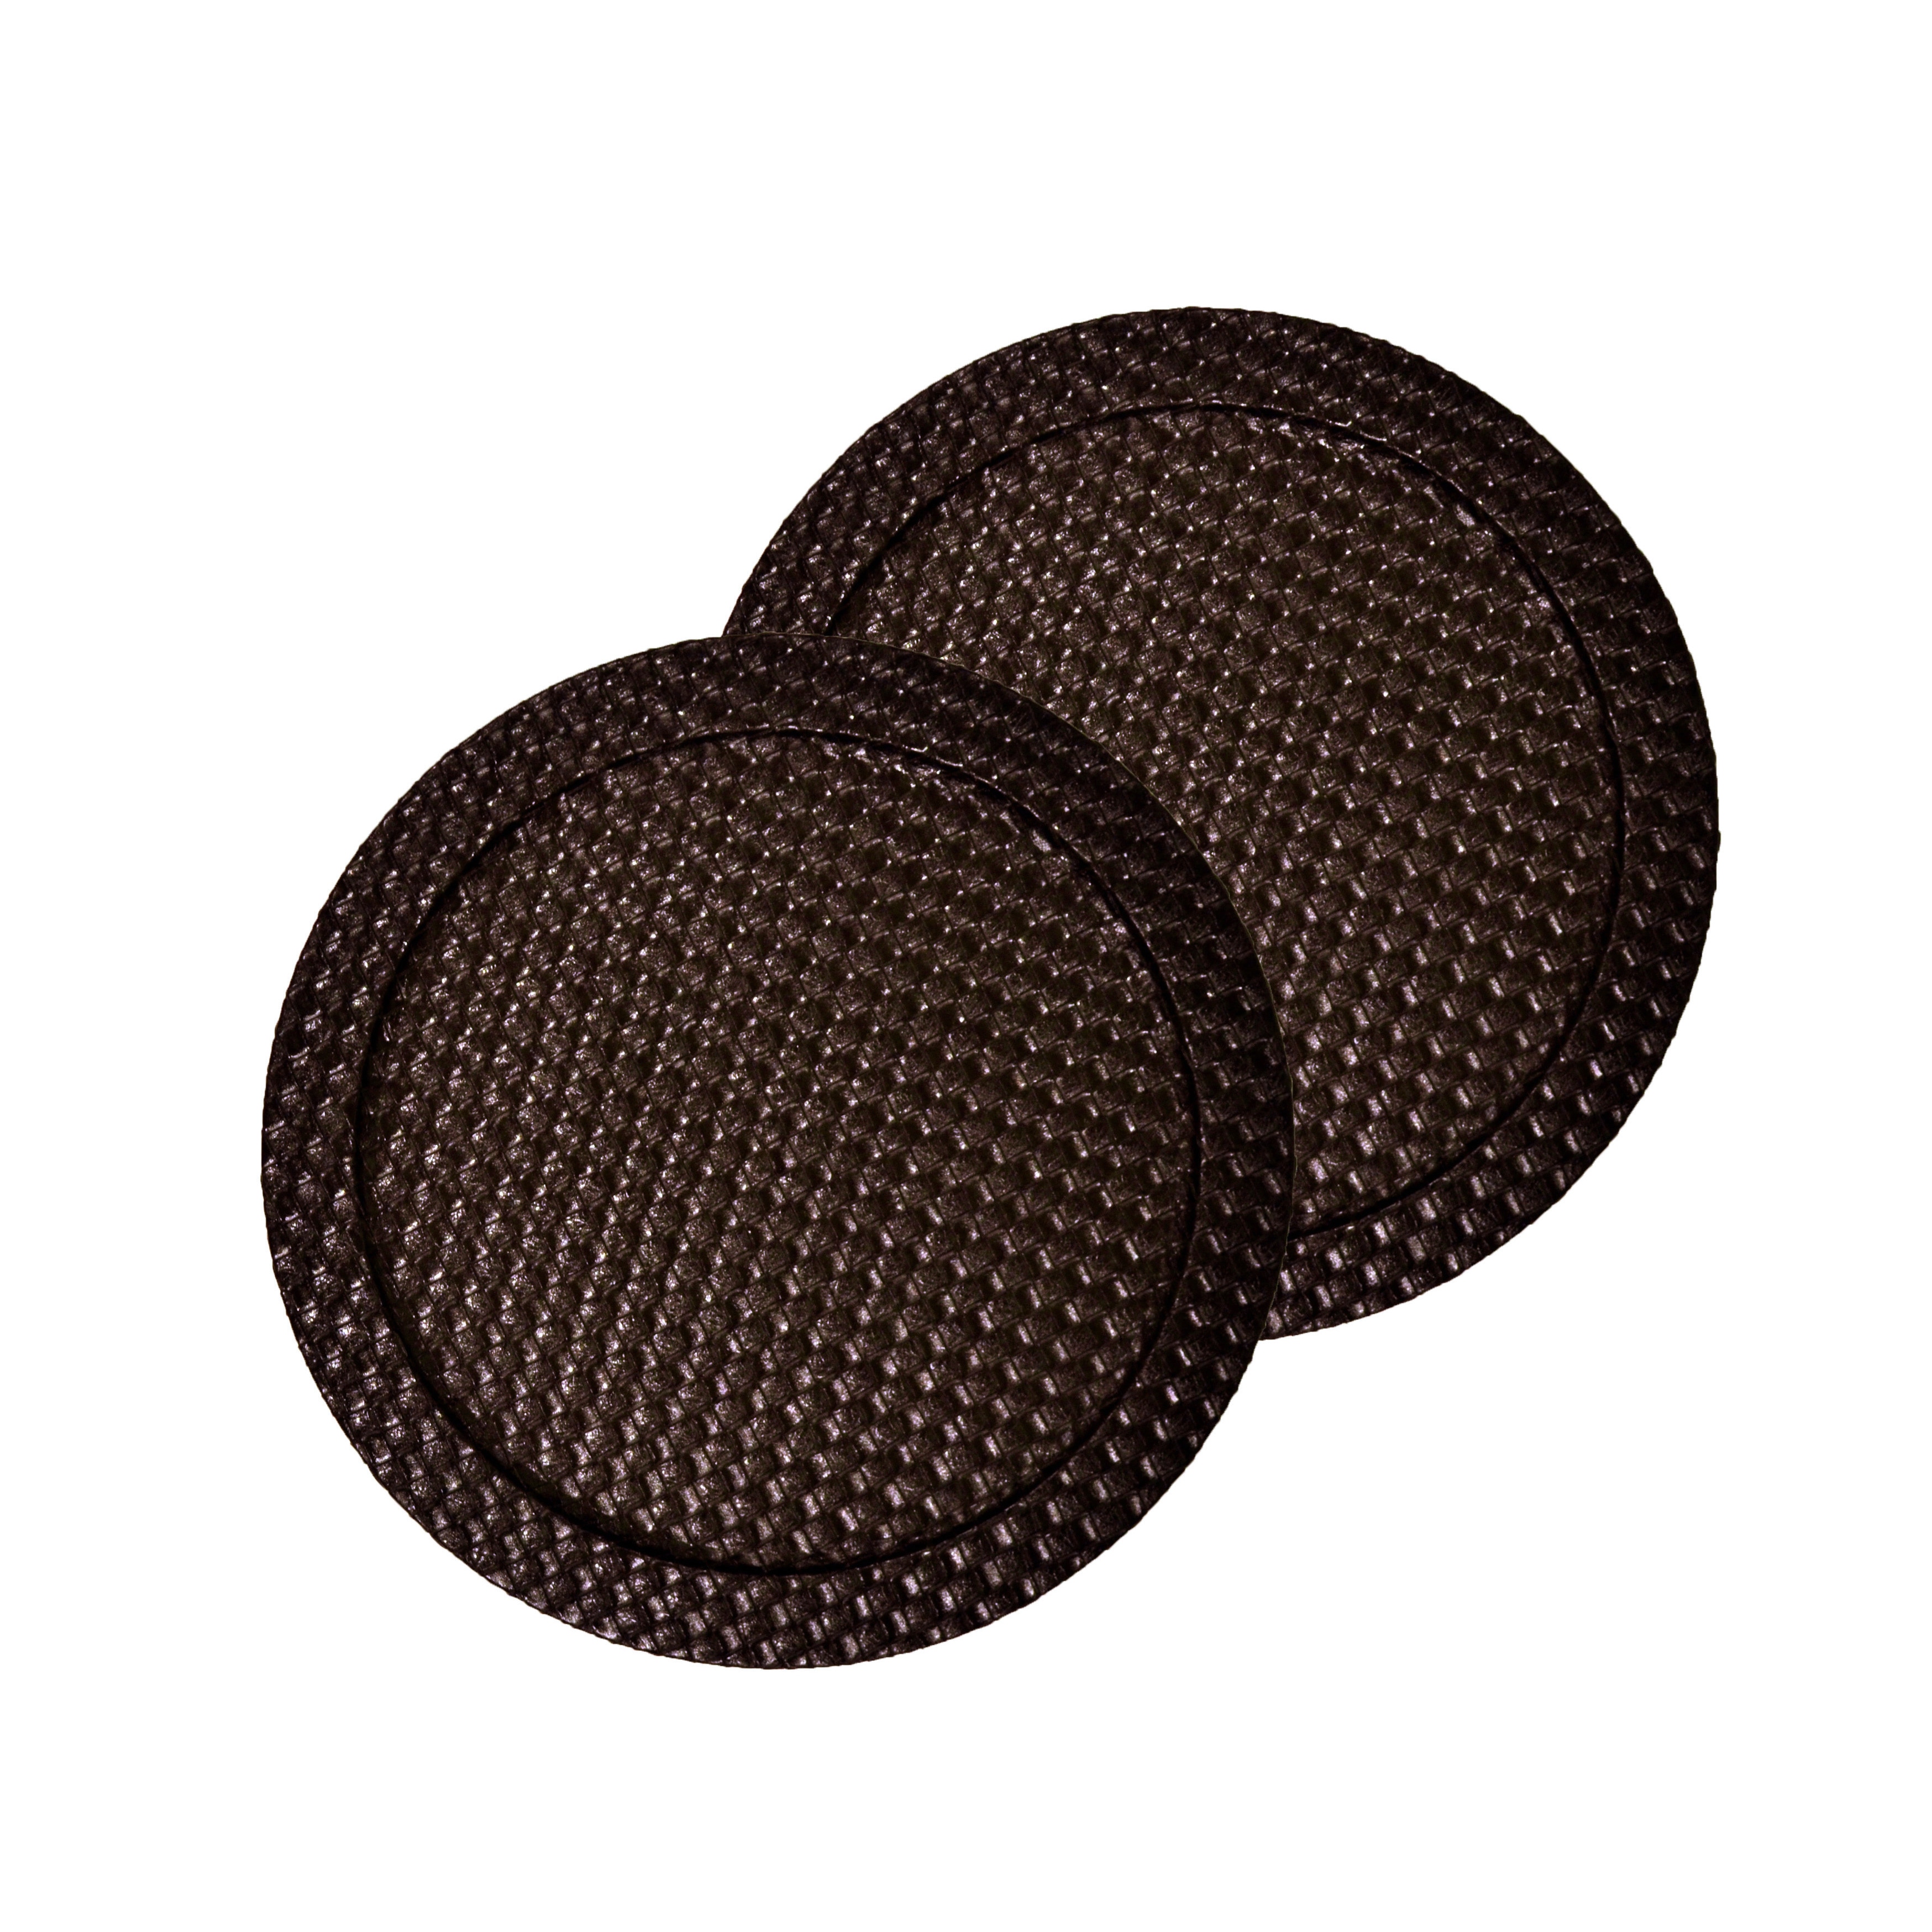 Faux Leather 2 piece Brown Weave Round Charger Set